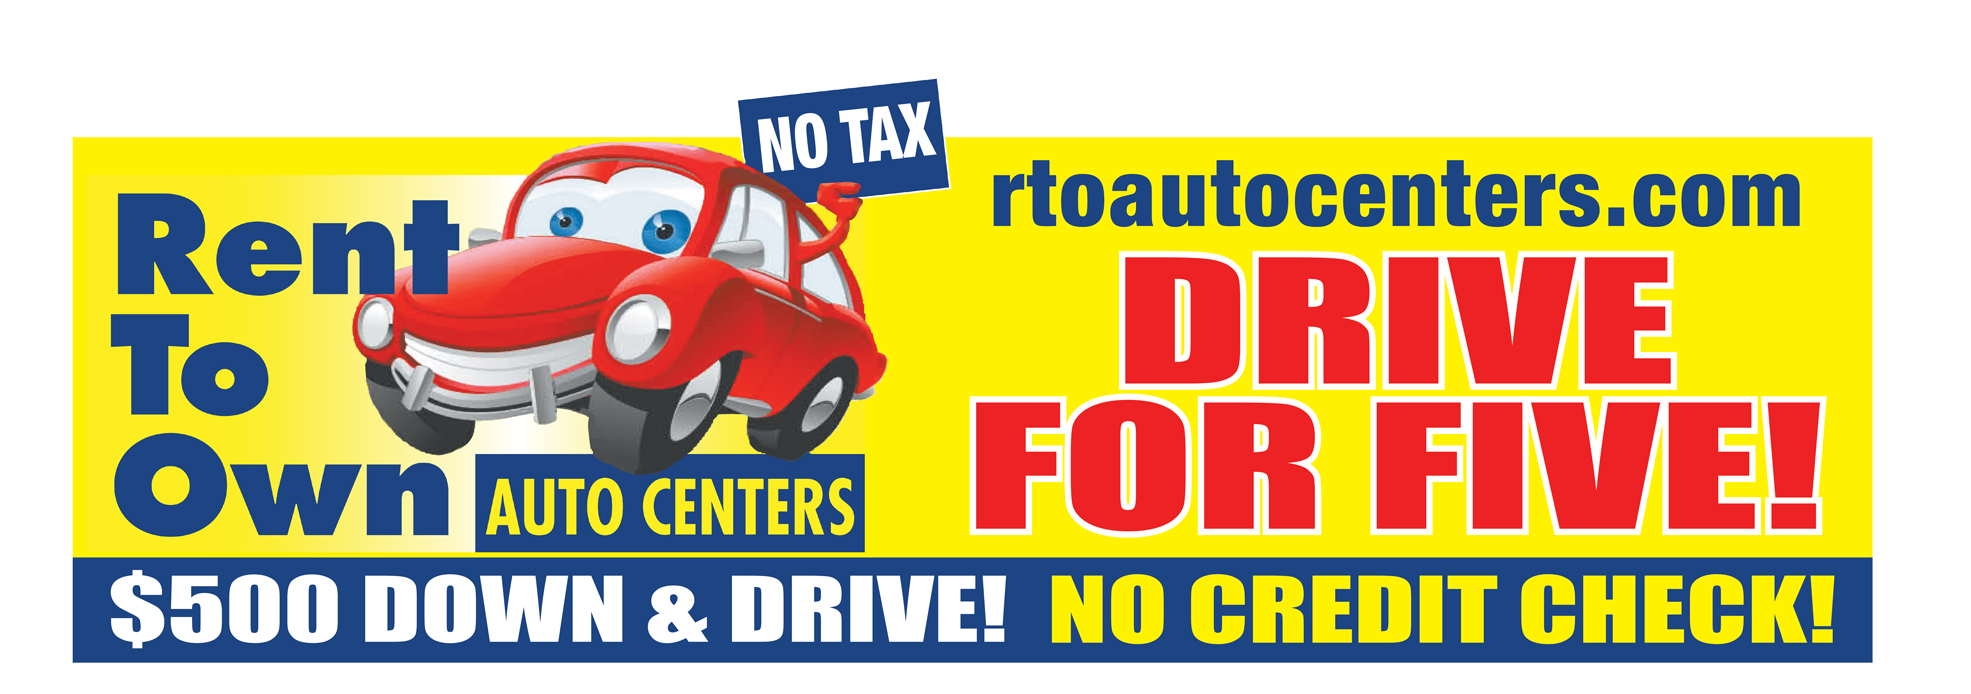 Rent to Own Auto Centers